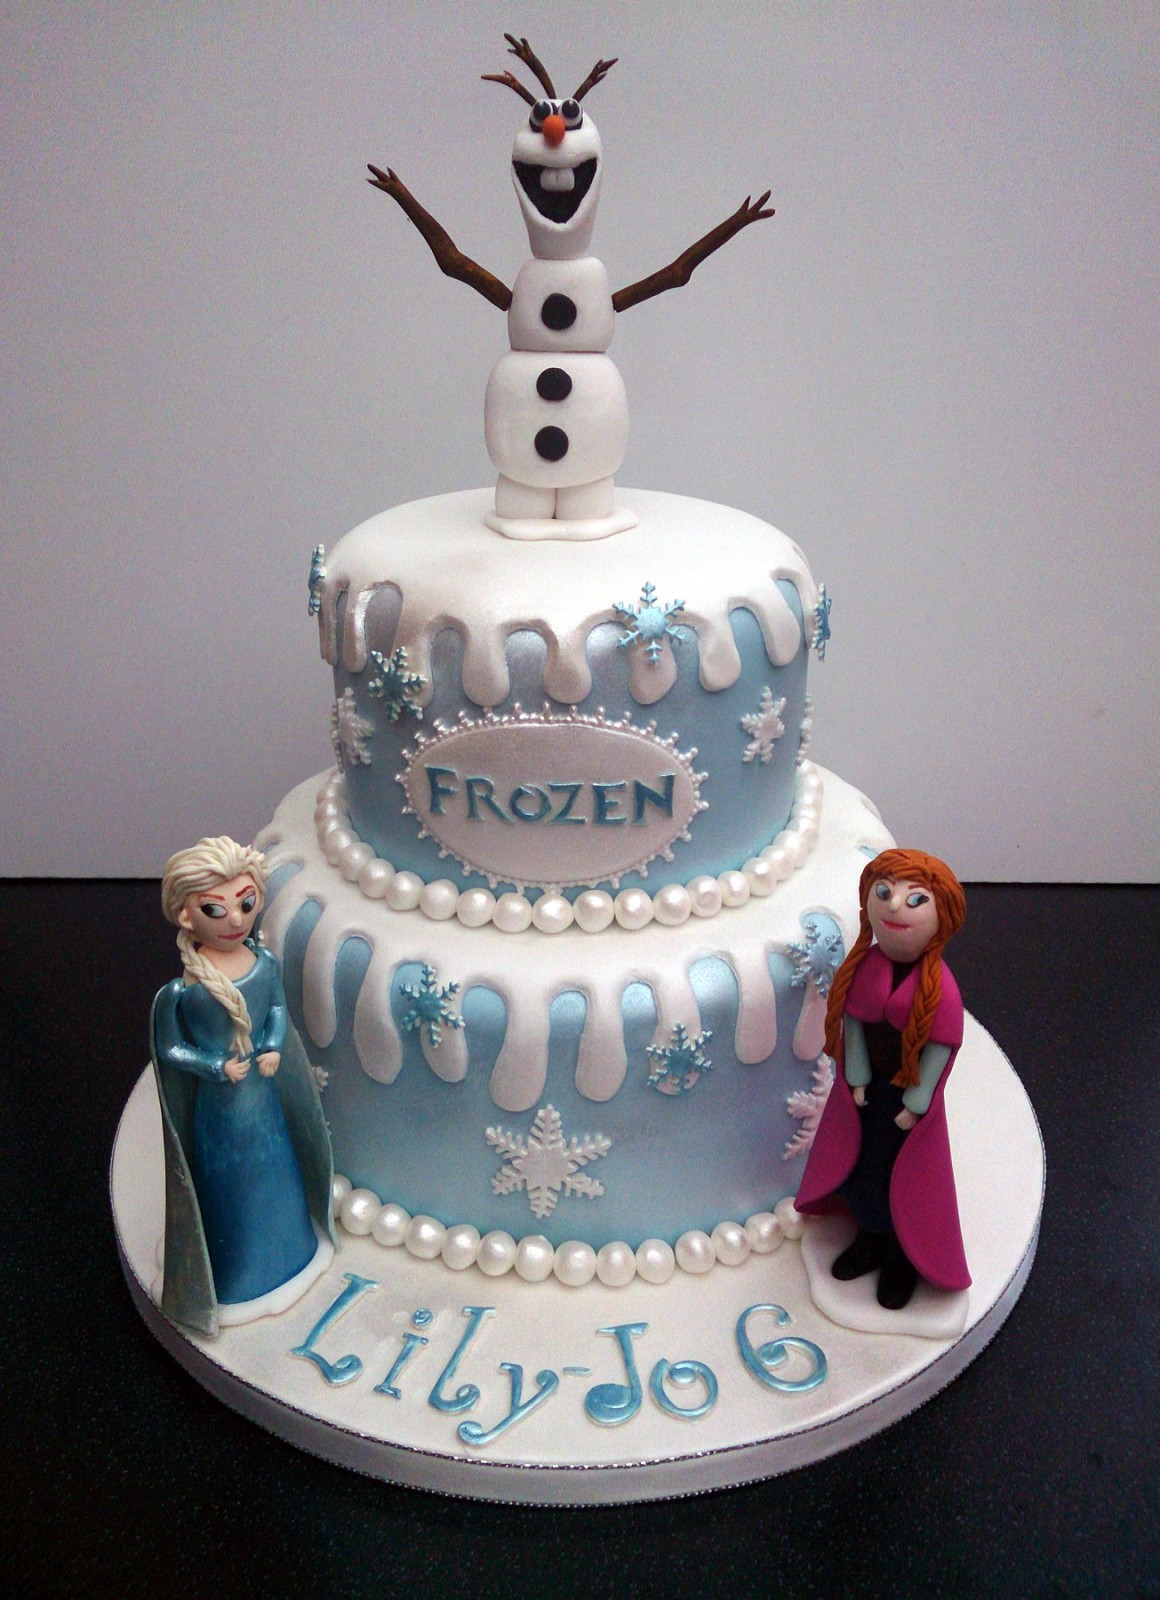 Frozen Themed Birthday Cake
 Disney Frozen Themed Cake With Olaf Anna and Elsa Susie